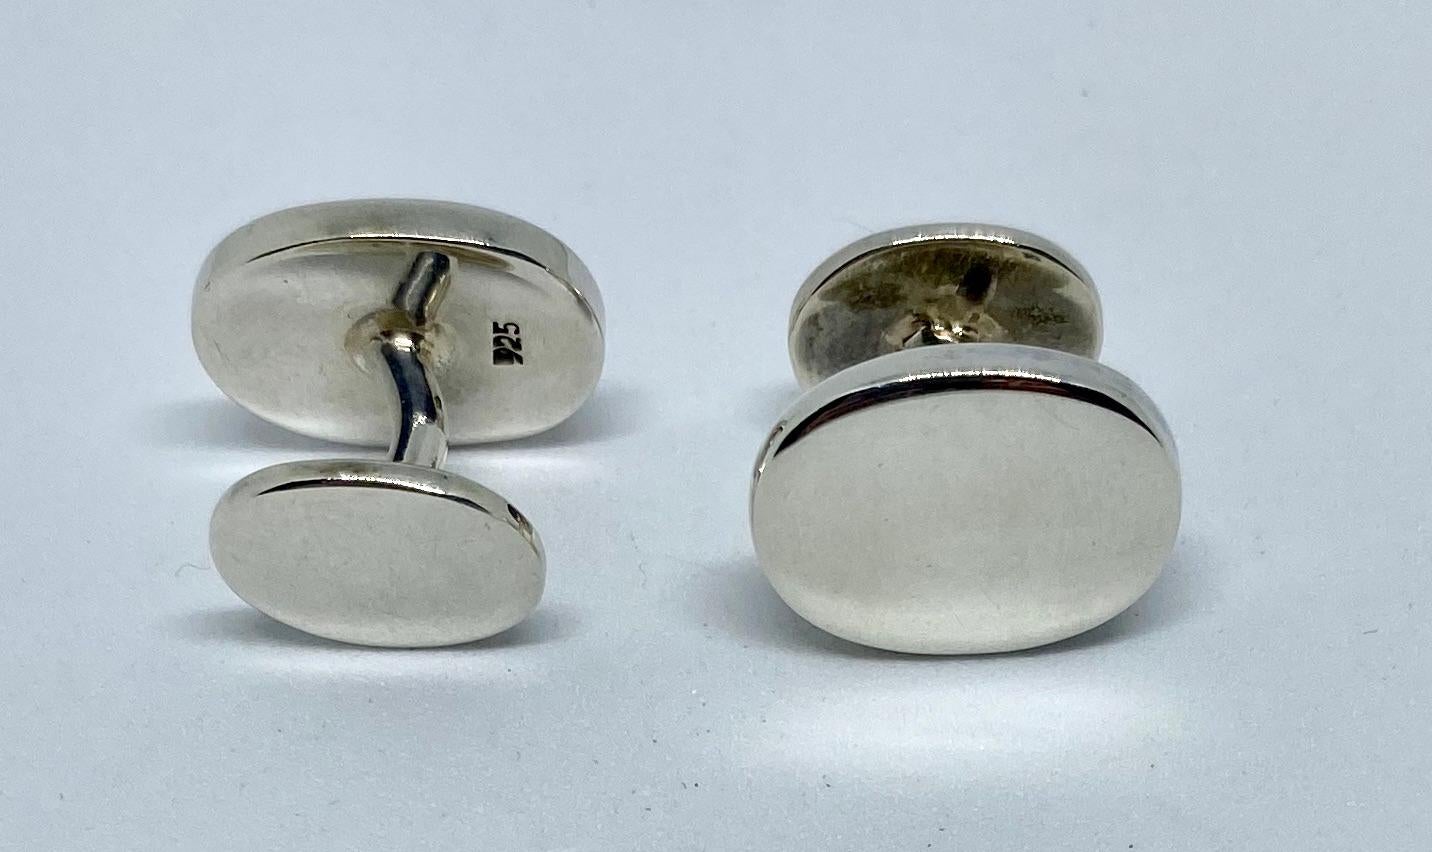 These heavy, classic oval cufflinks are very well made and slip easily into the buttonholes of a shirt cuff. 

The fronts measure 17 by 13mm, while the backs measure 13 by 10mm. They are connected by a solid silver bar. Together, the cufflinks weigh